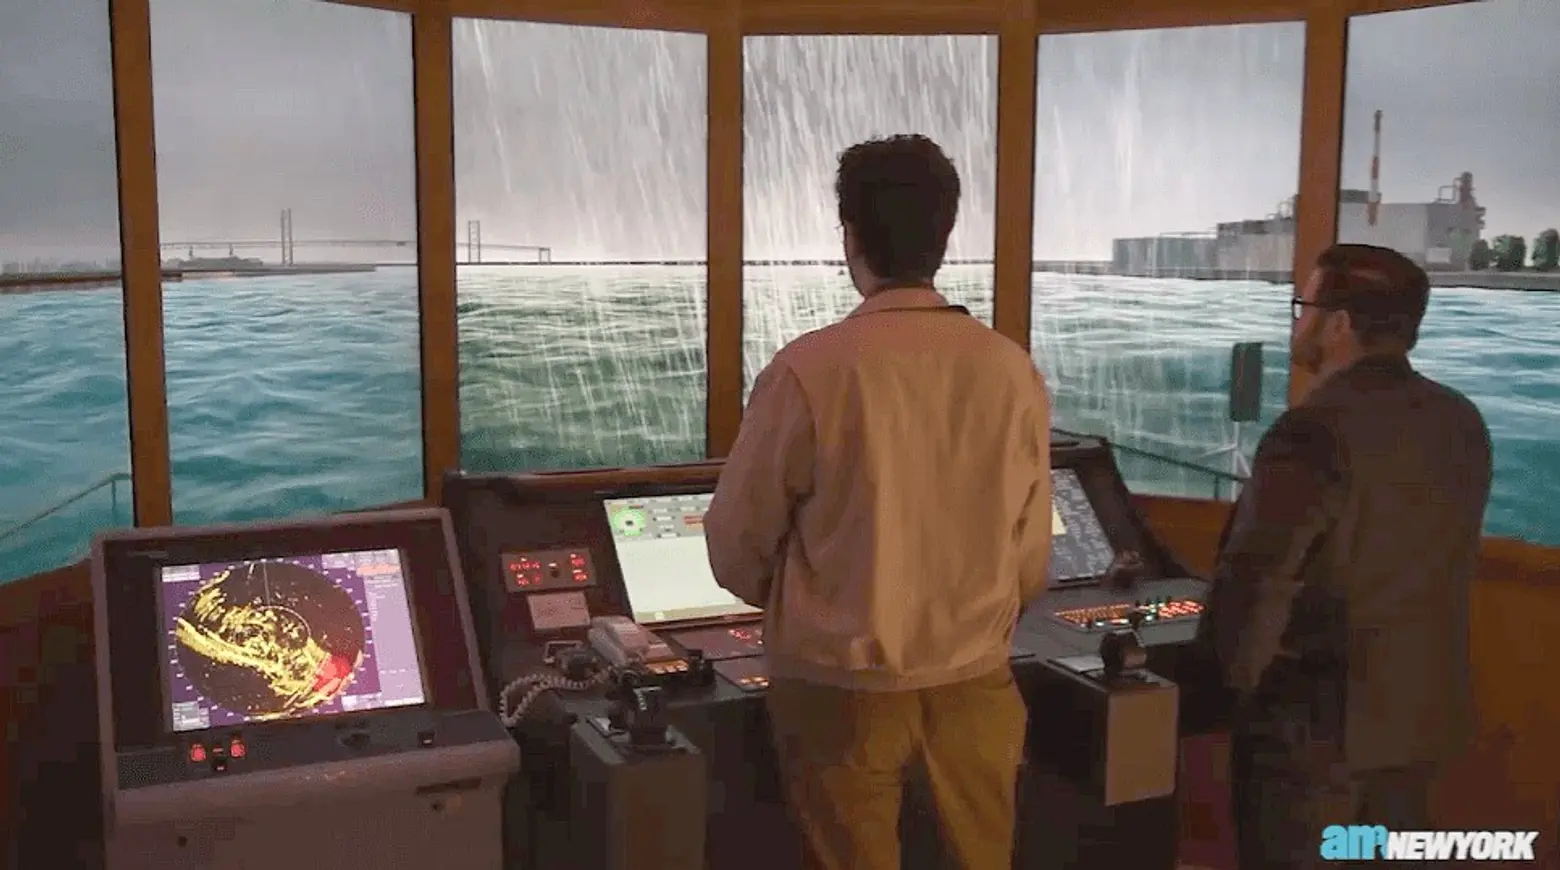 Before hitting the Harbor, NYC Ferry captains train with a boat simulator